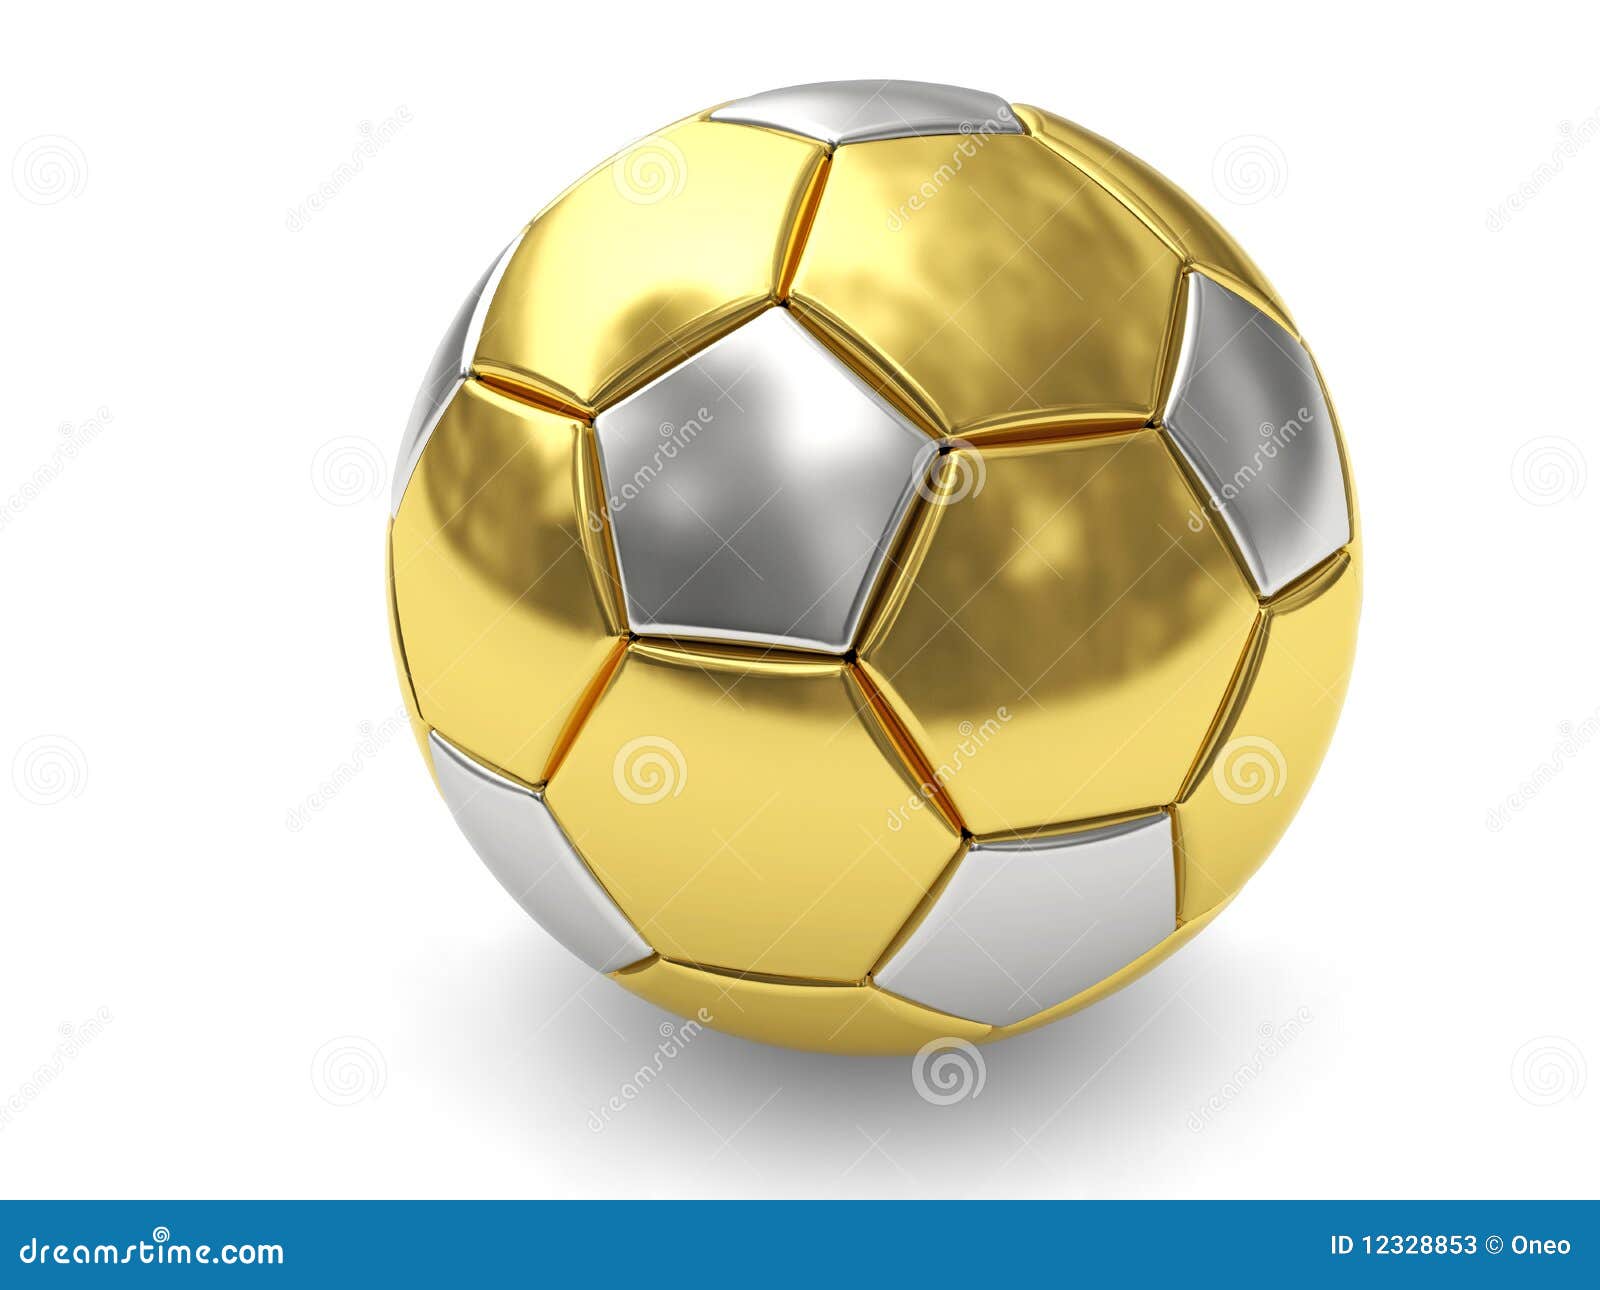 Gold Soccer Ball On White Background Stock Photos - Image: 12328853